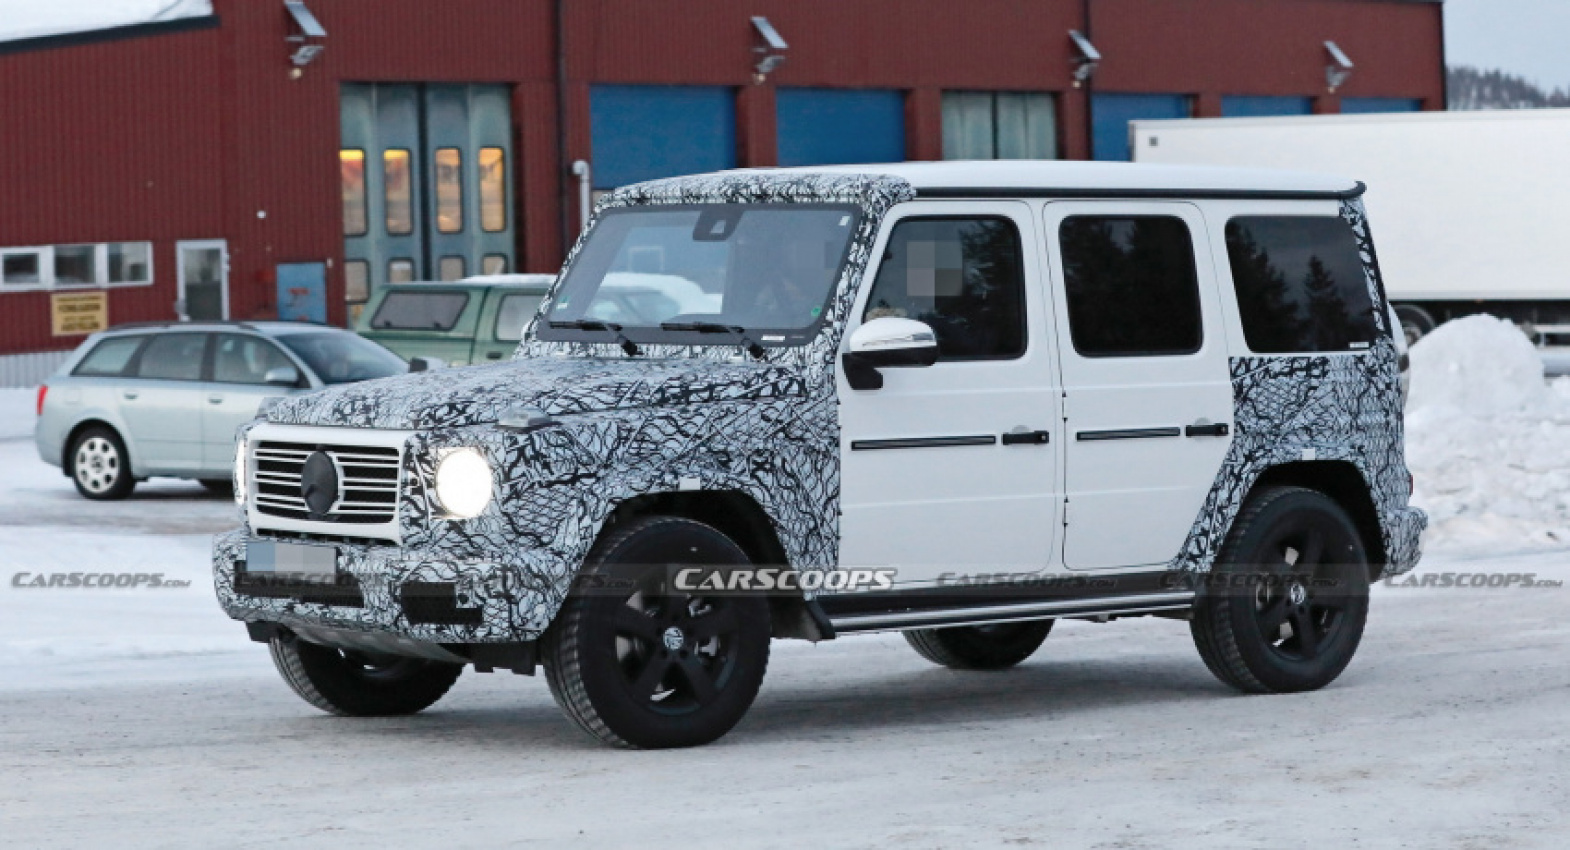 autos, cars, mercedes-benz, news, mercedes, mercedes g-class, mercedes scoops, scoops, facelifted 2023 mercedes g-class caught testing in the snow